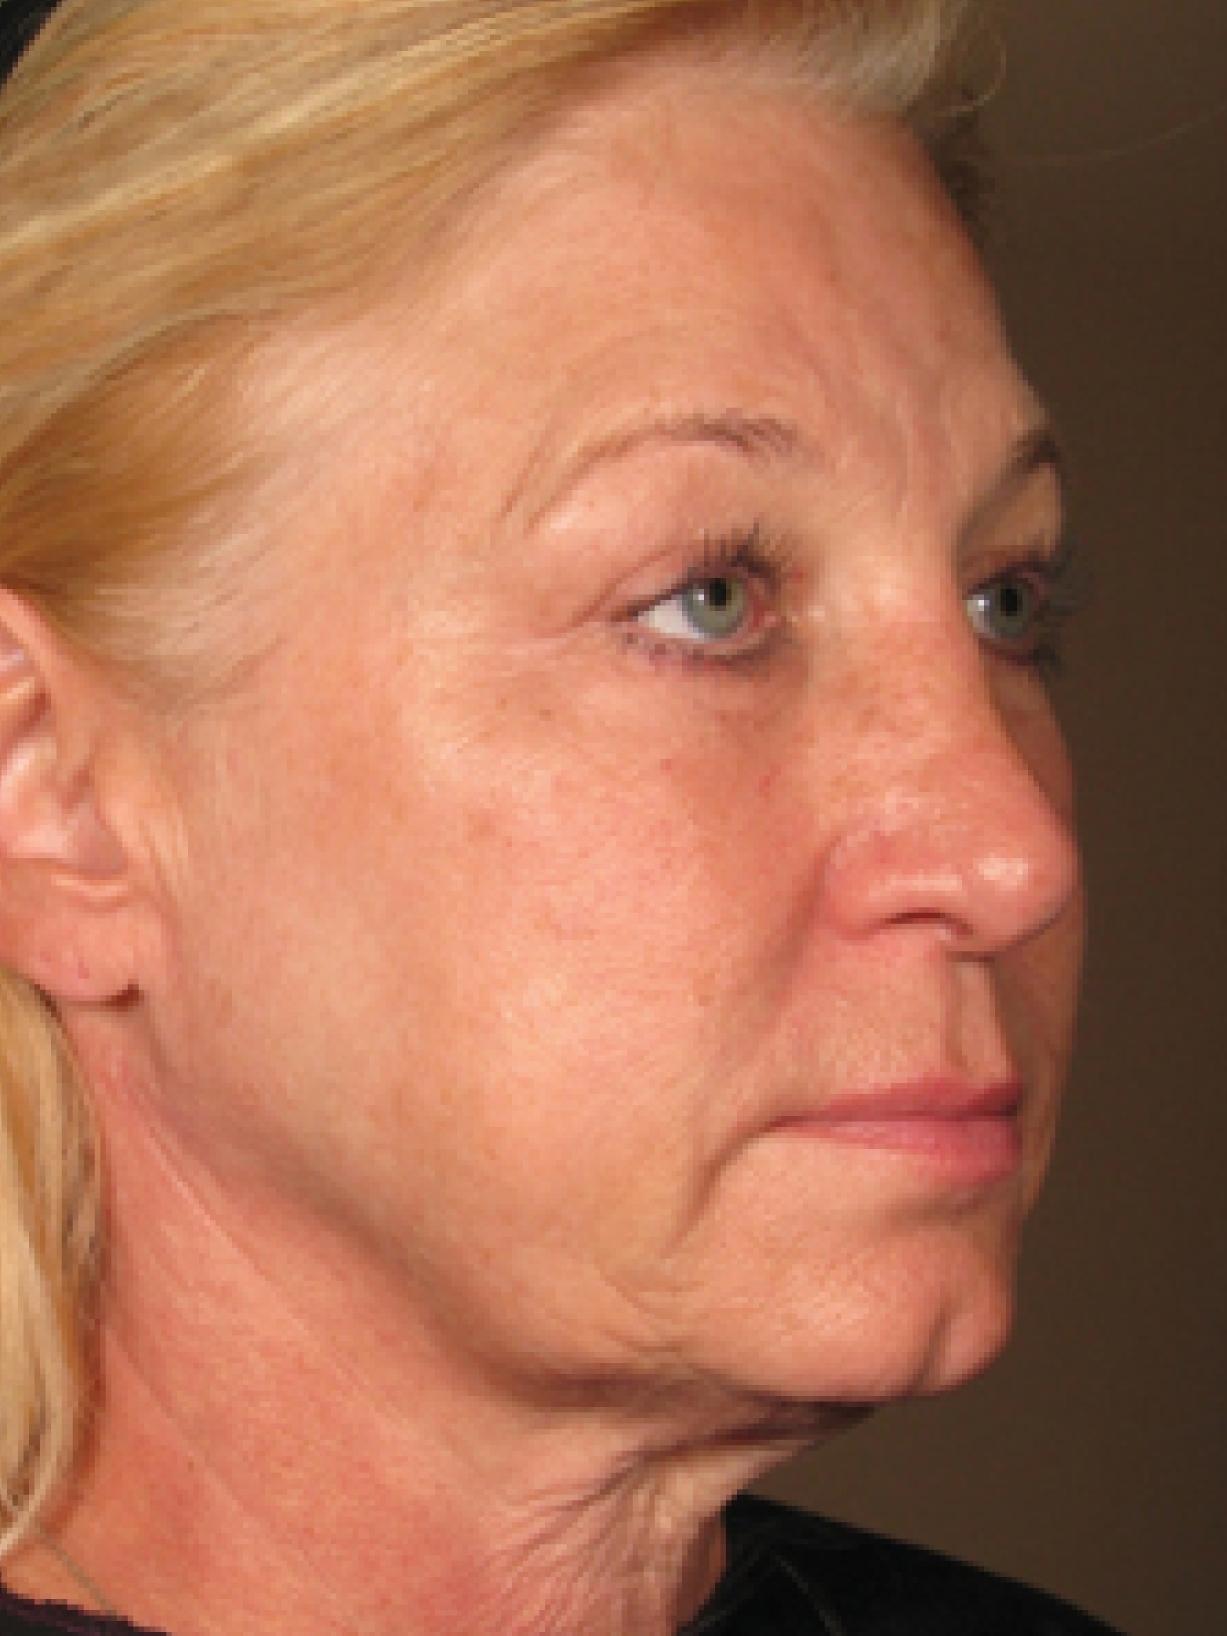 Ultherapy® - Face: Patient 4 - Before 1